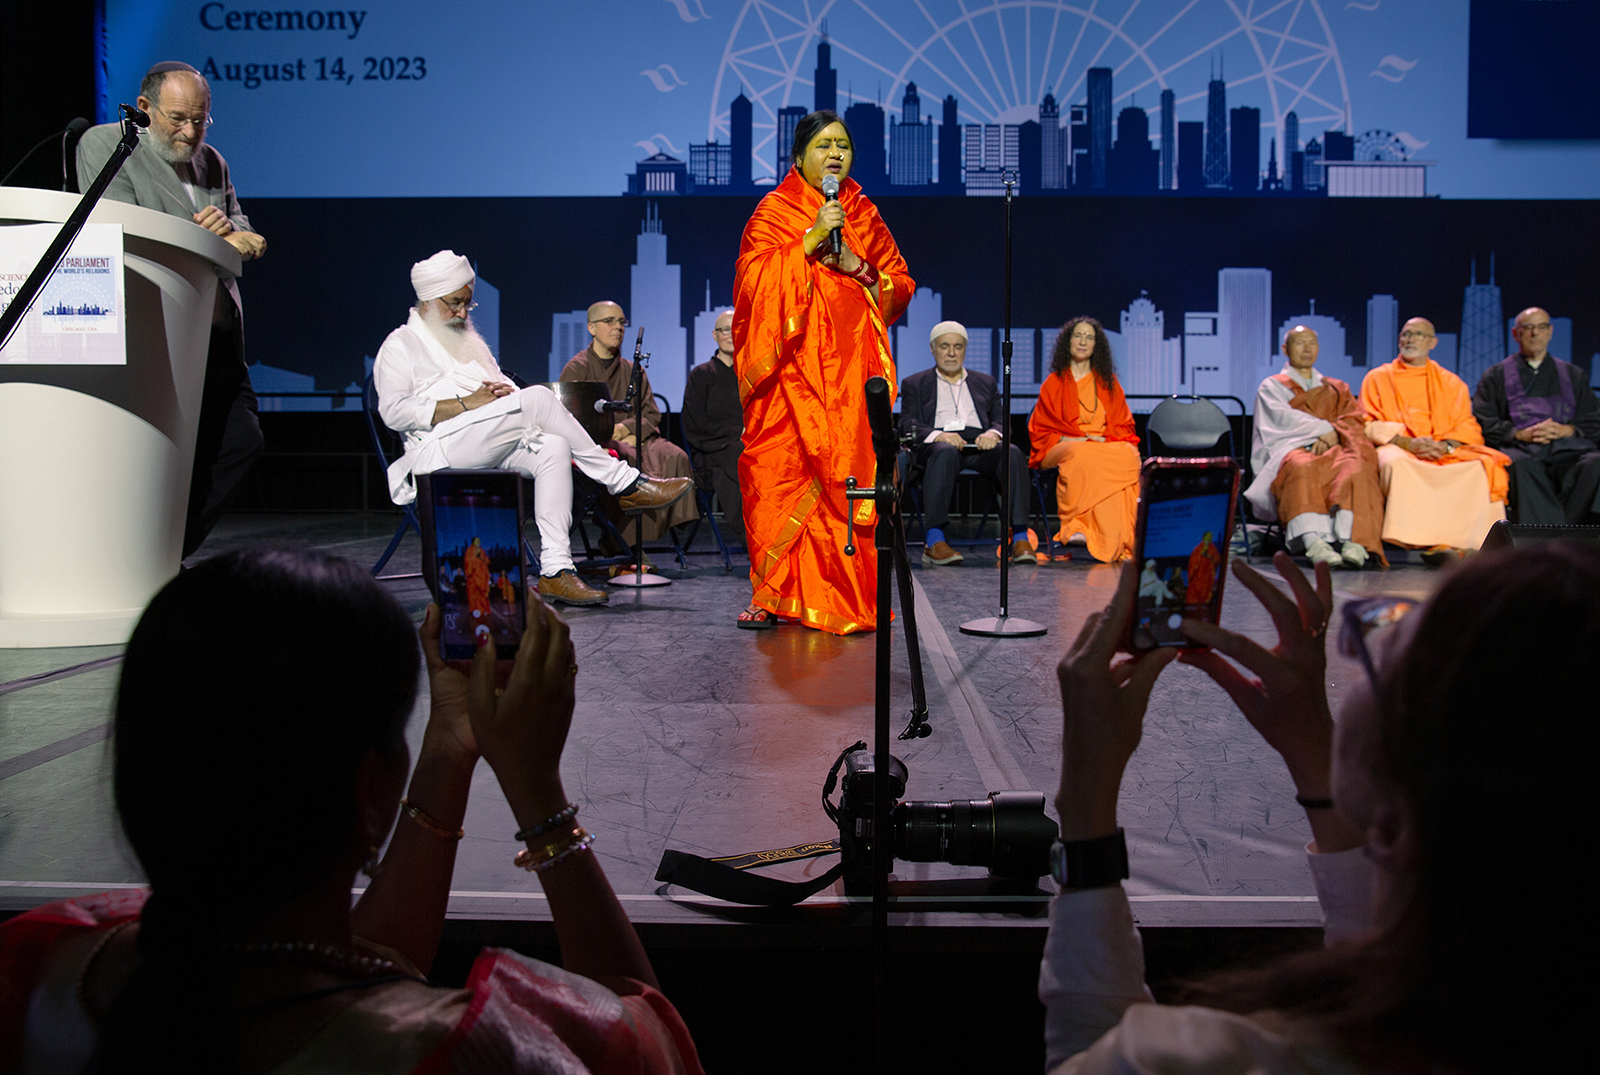 Devotees of Amma Sri Karunamayi, a Hindu spiritual leader, use their smartphones to record her speech during a Climate Repentence Ceremony at the Parliament of the World's Religions in Chicago on August 15, 2023. Photo by Lauren Pond for RNS